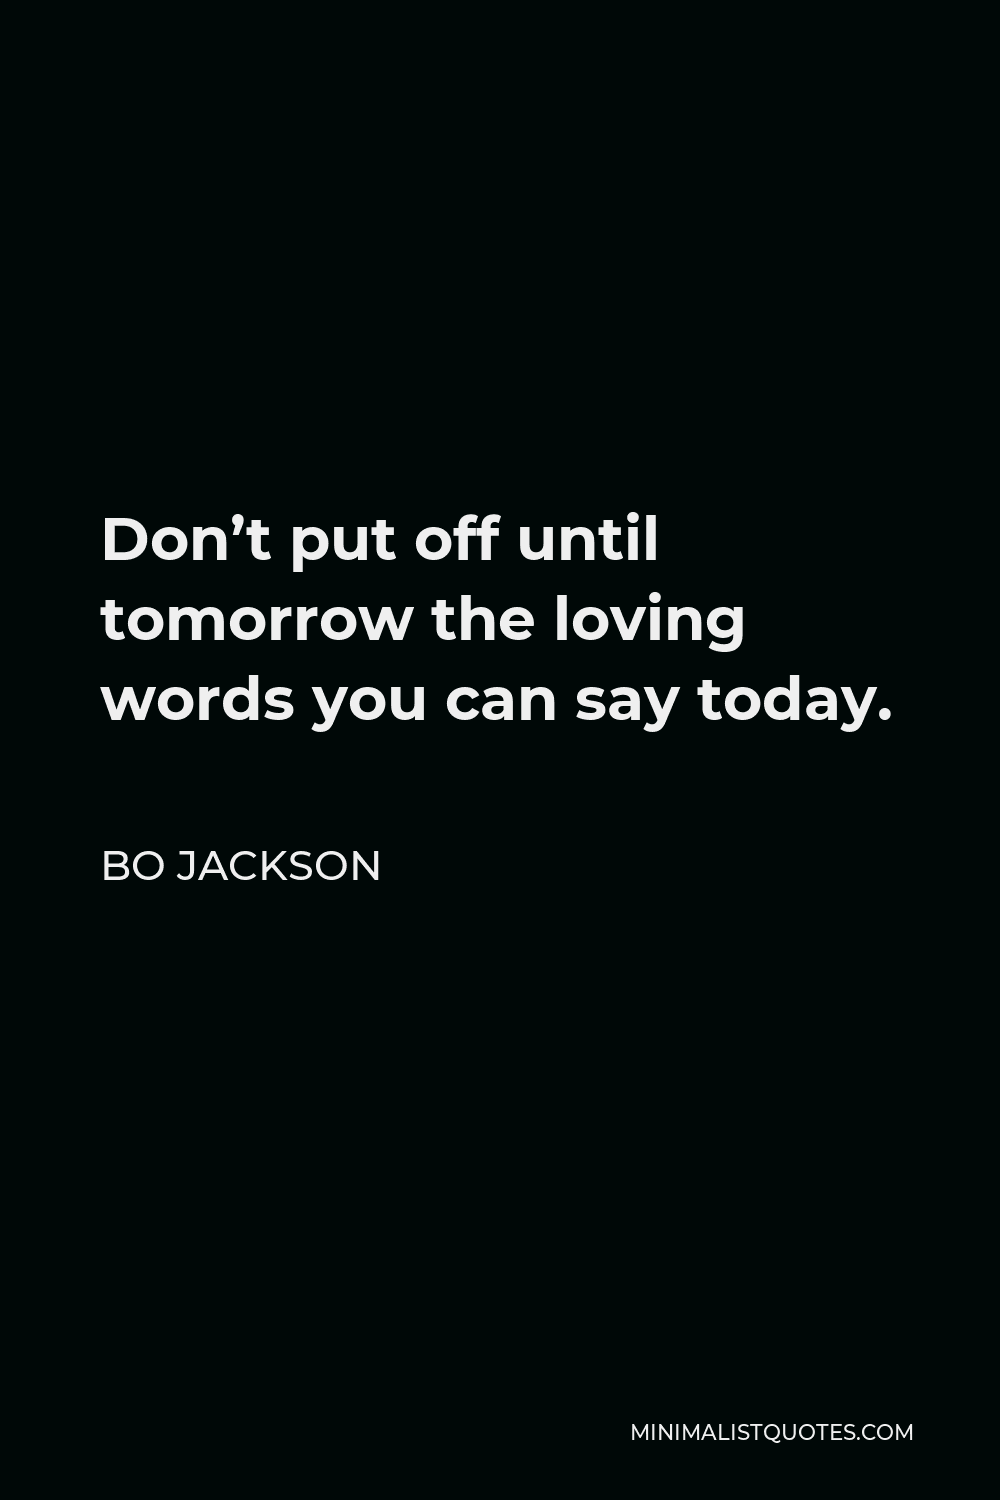 Bo Jackson Quote - Don’t put off until tomorrow the loving words you can say today.